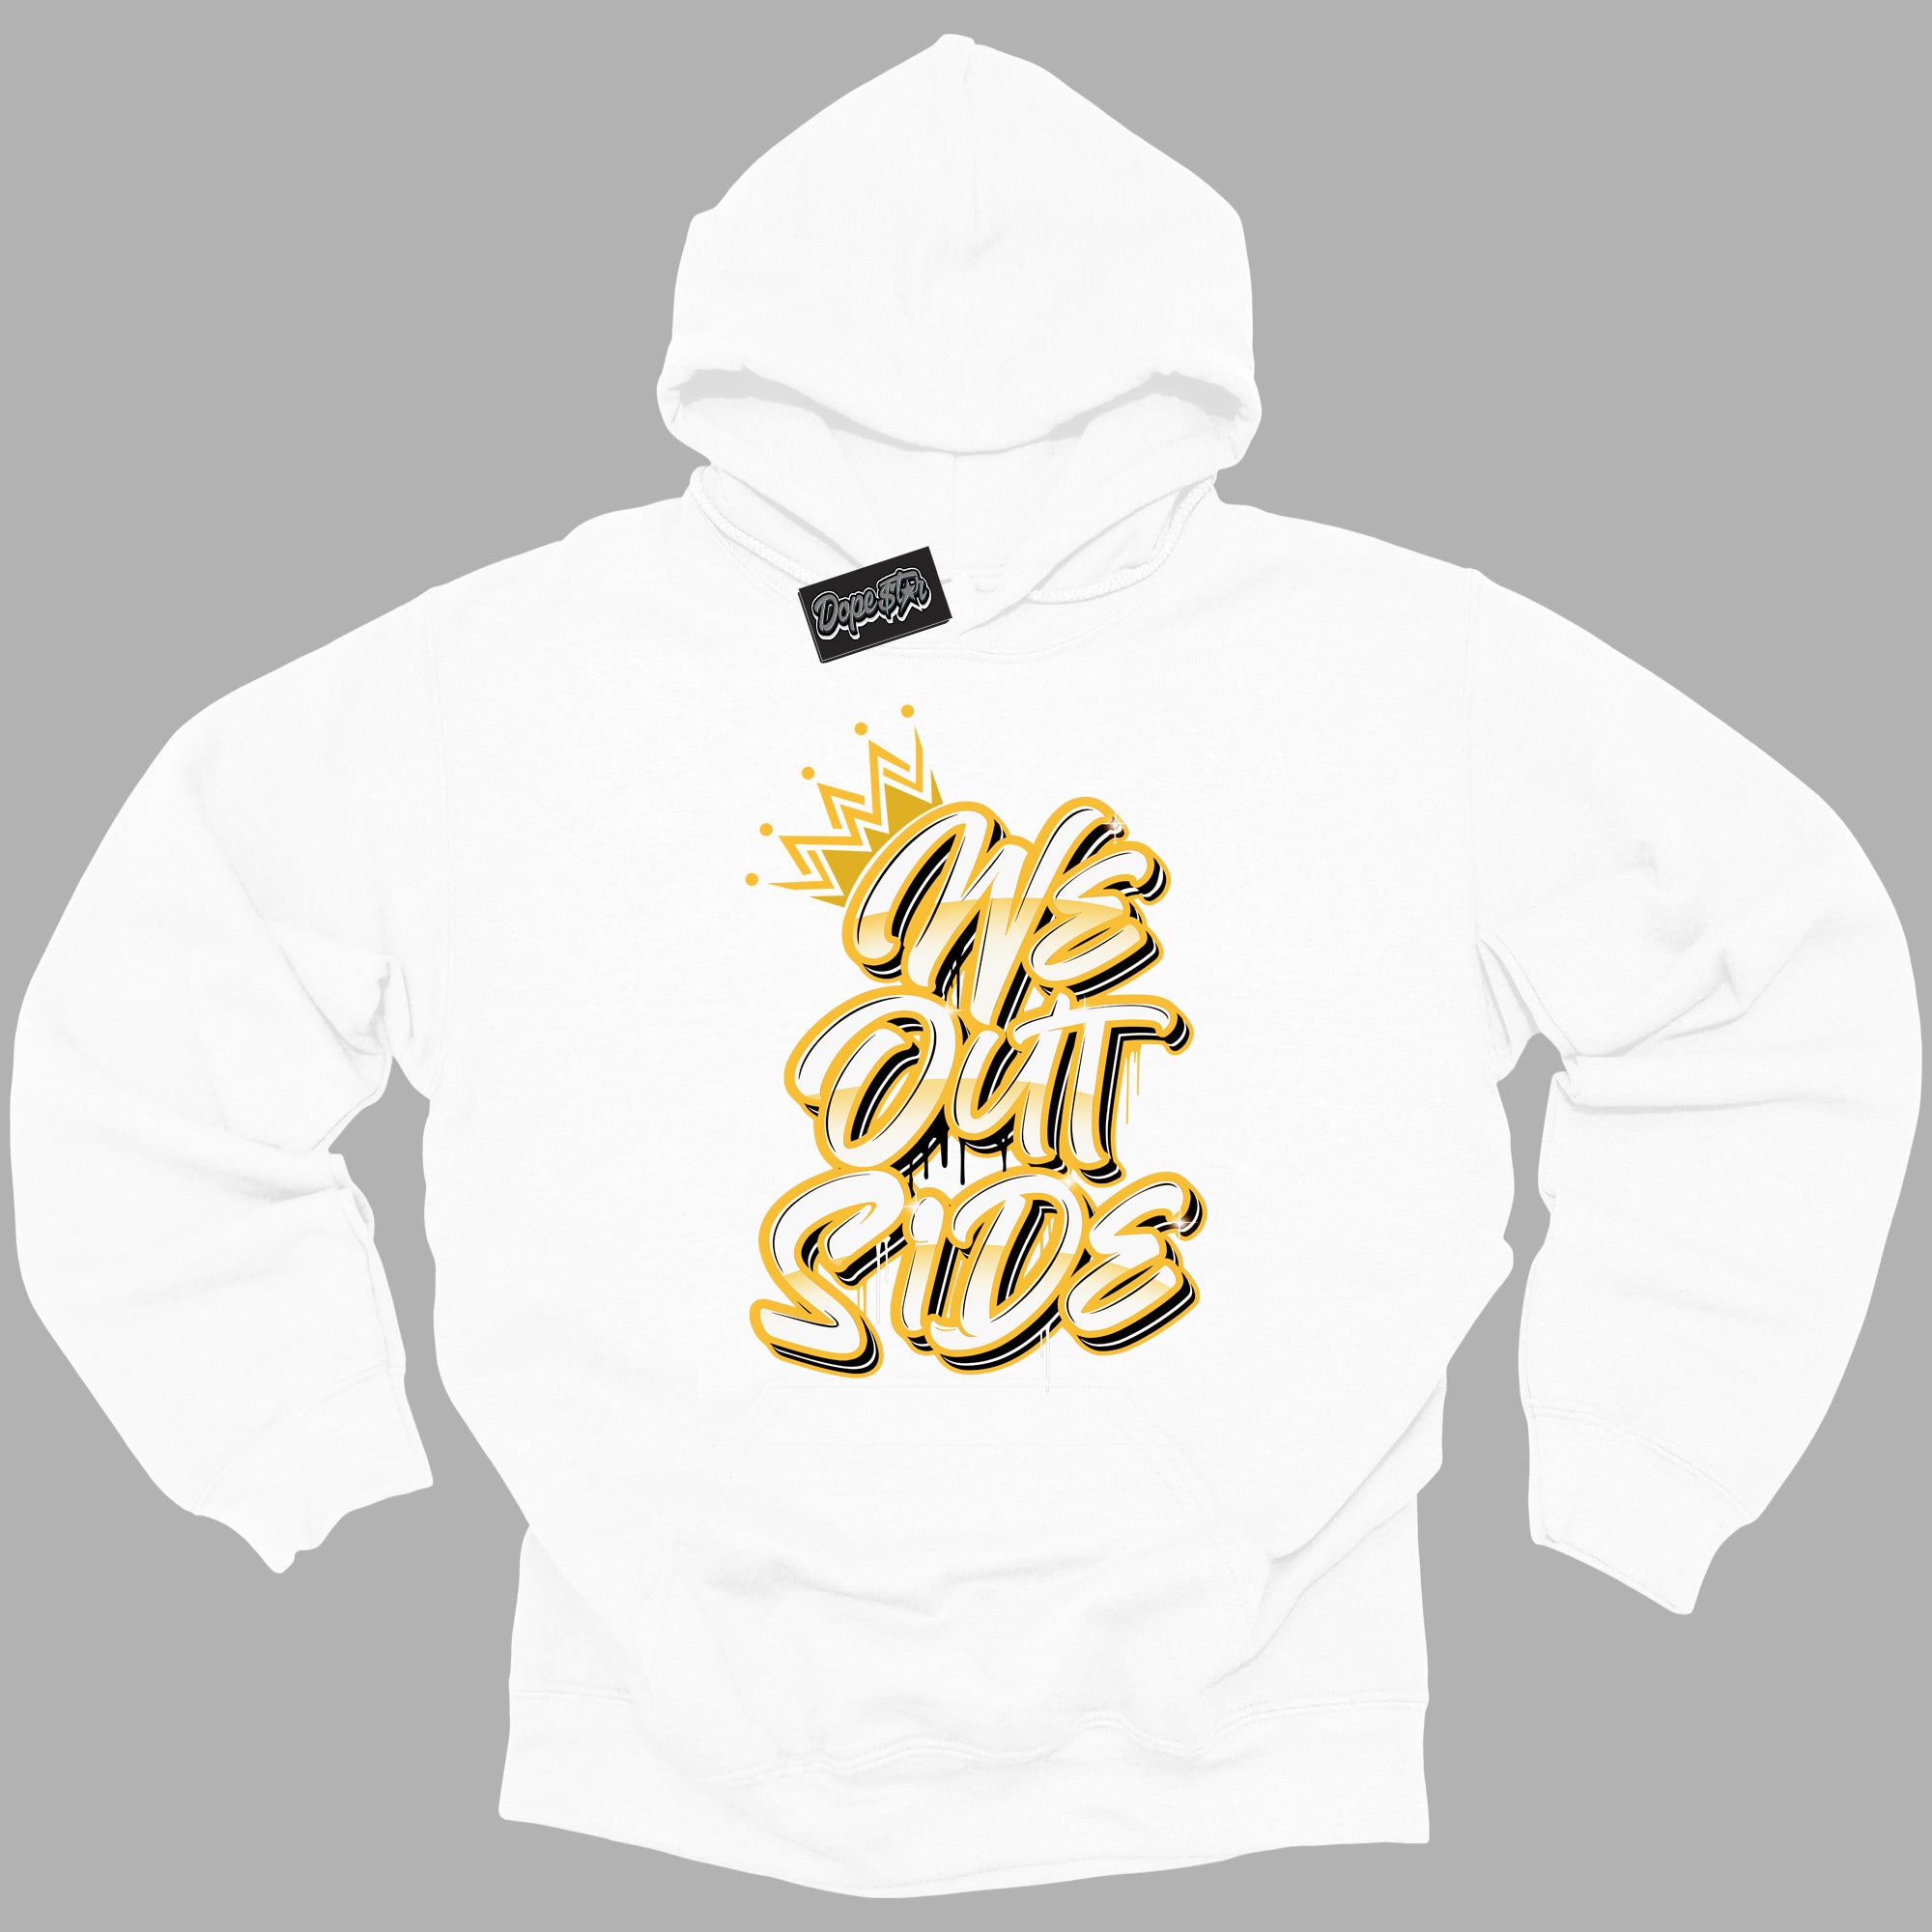 Cool White Hoodie with “We Outside ”  design that Perfectly Matches Yellow Ochre 6s Sneakers.